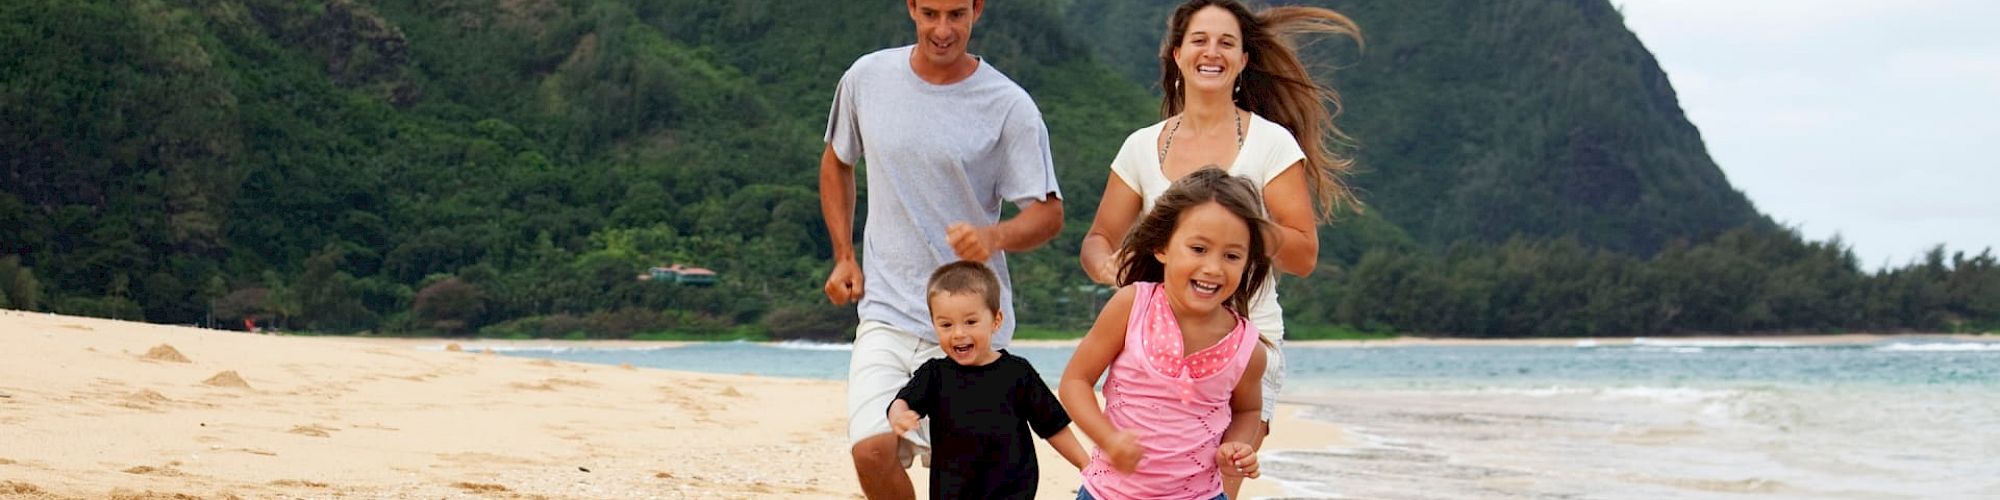 A family of four runs along a sandy beach with green mountains in the background and the ocean to the side, all appearing happy and relaxed.